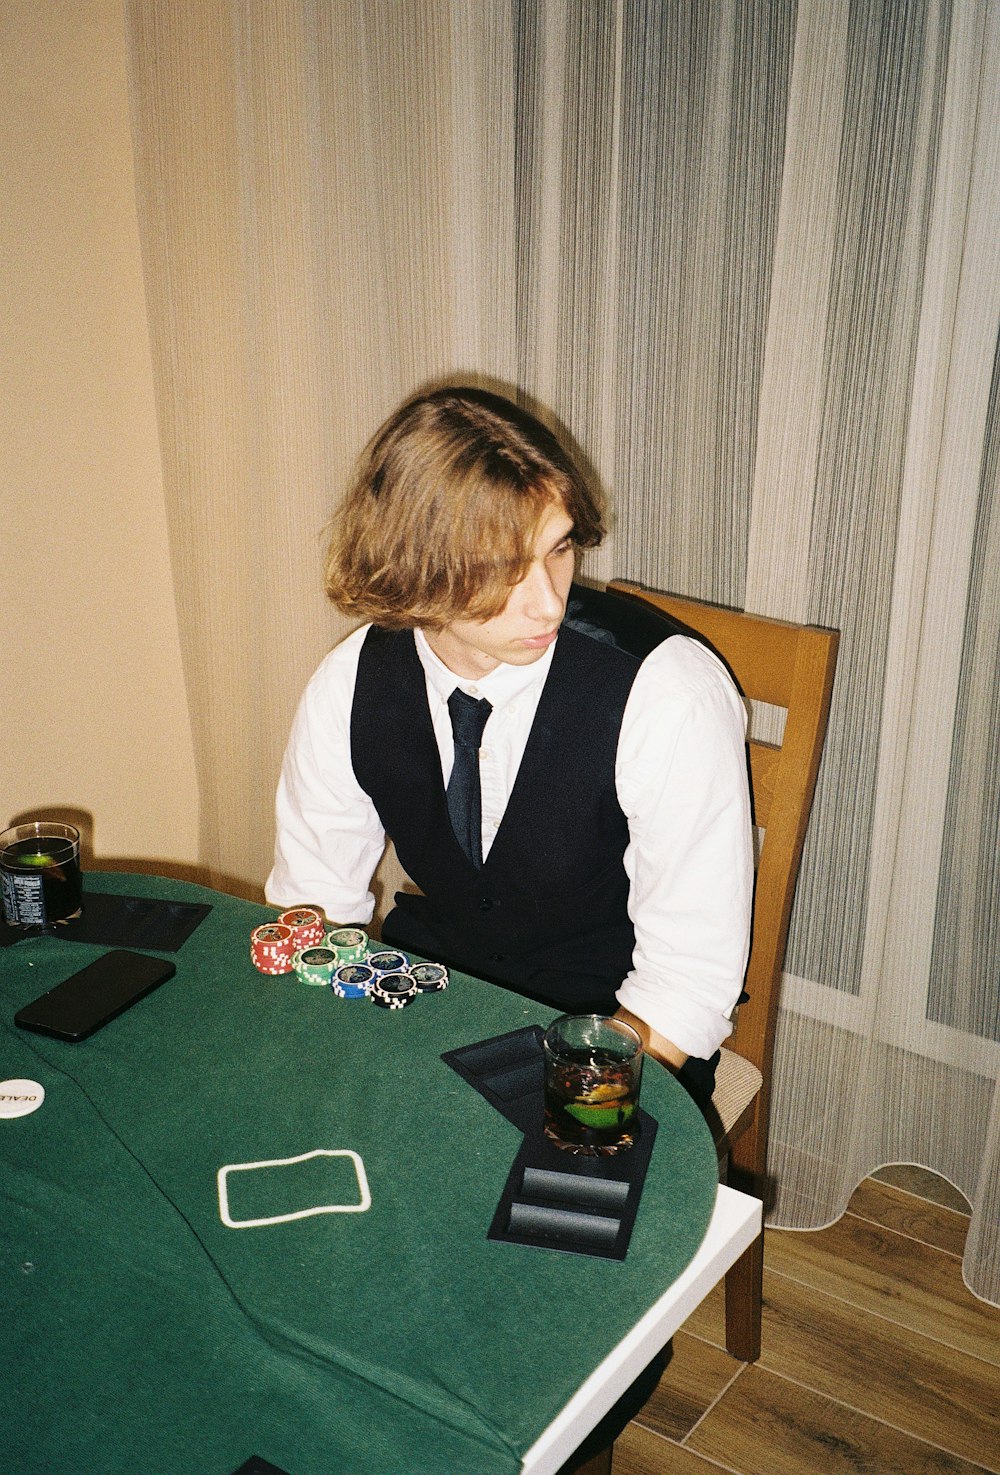 a man sitting at a table with a card in front of him